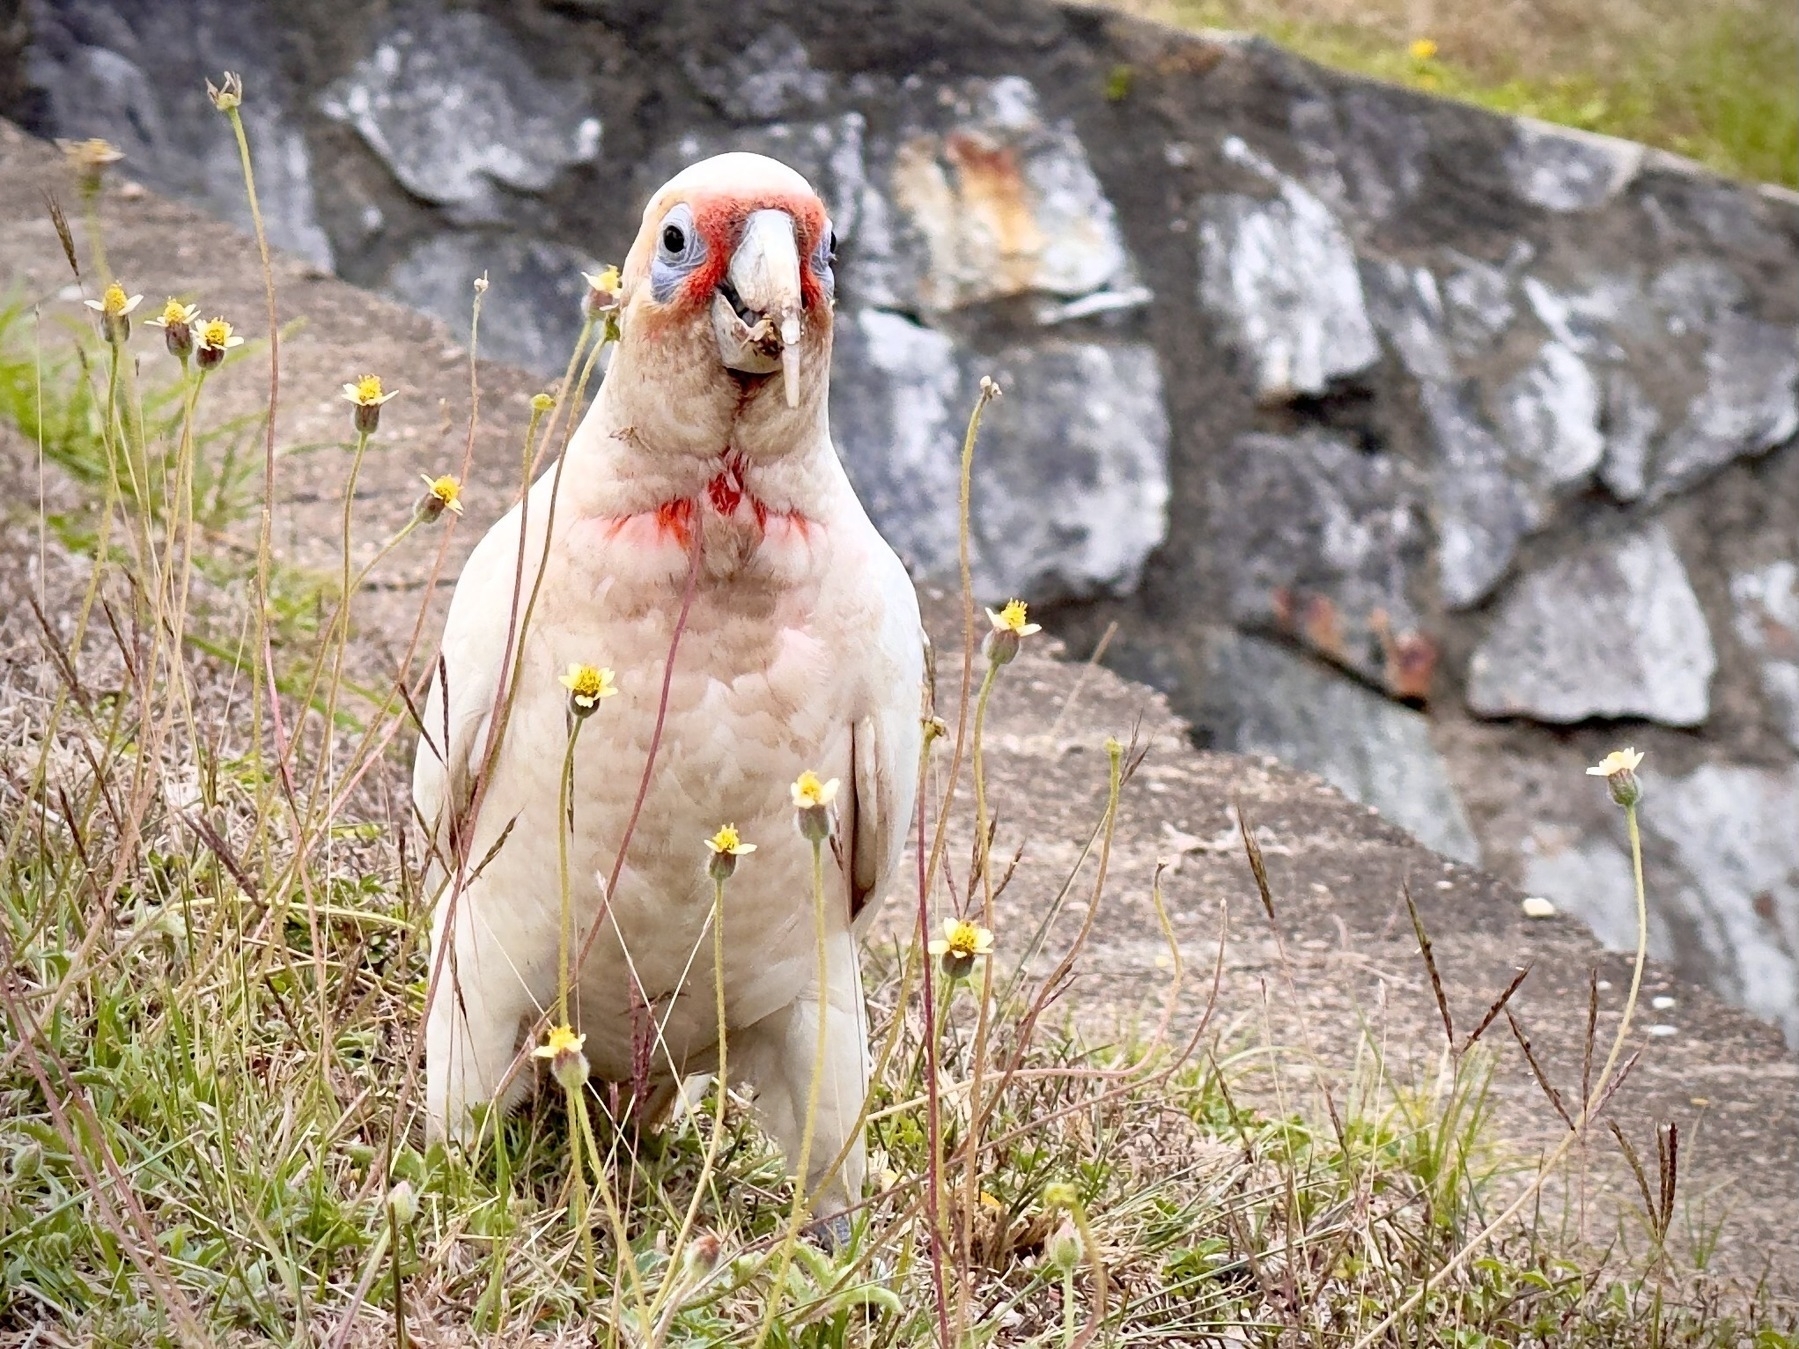 A corella snacking on grass seeds and flowers above a rock wall.